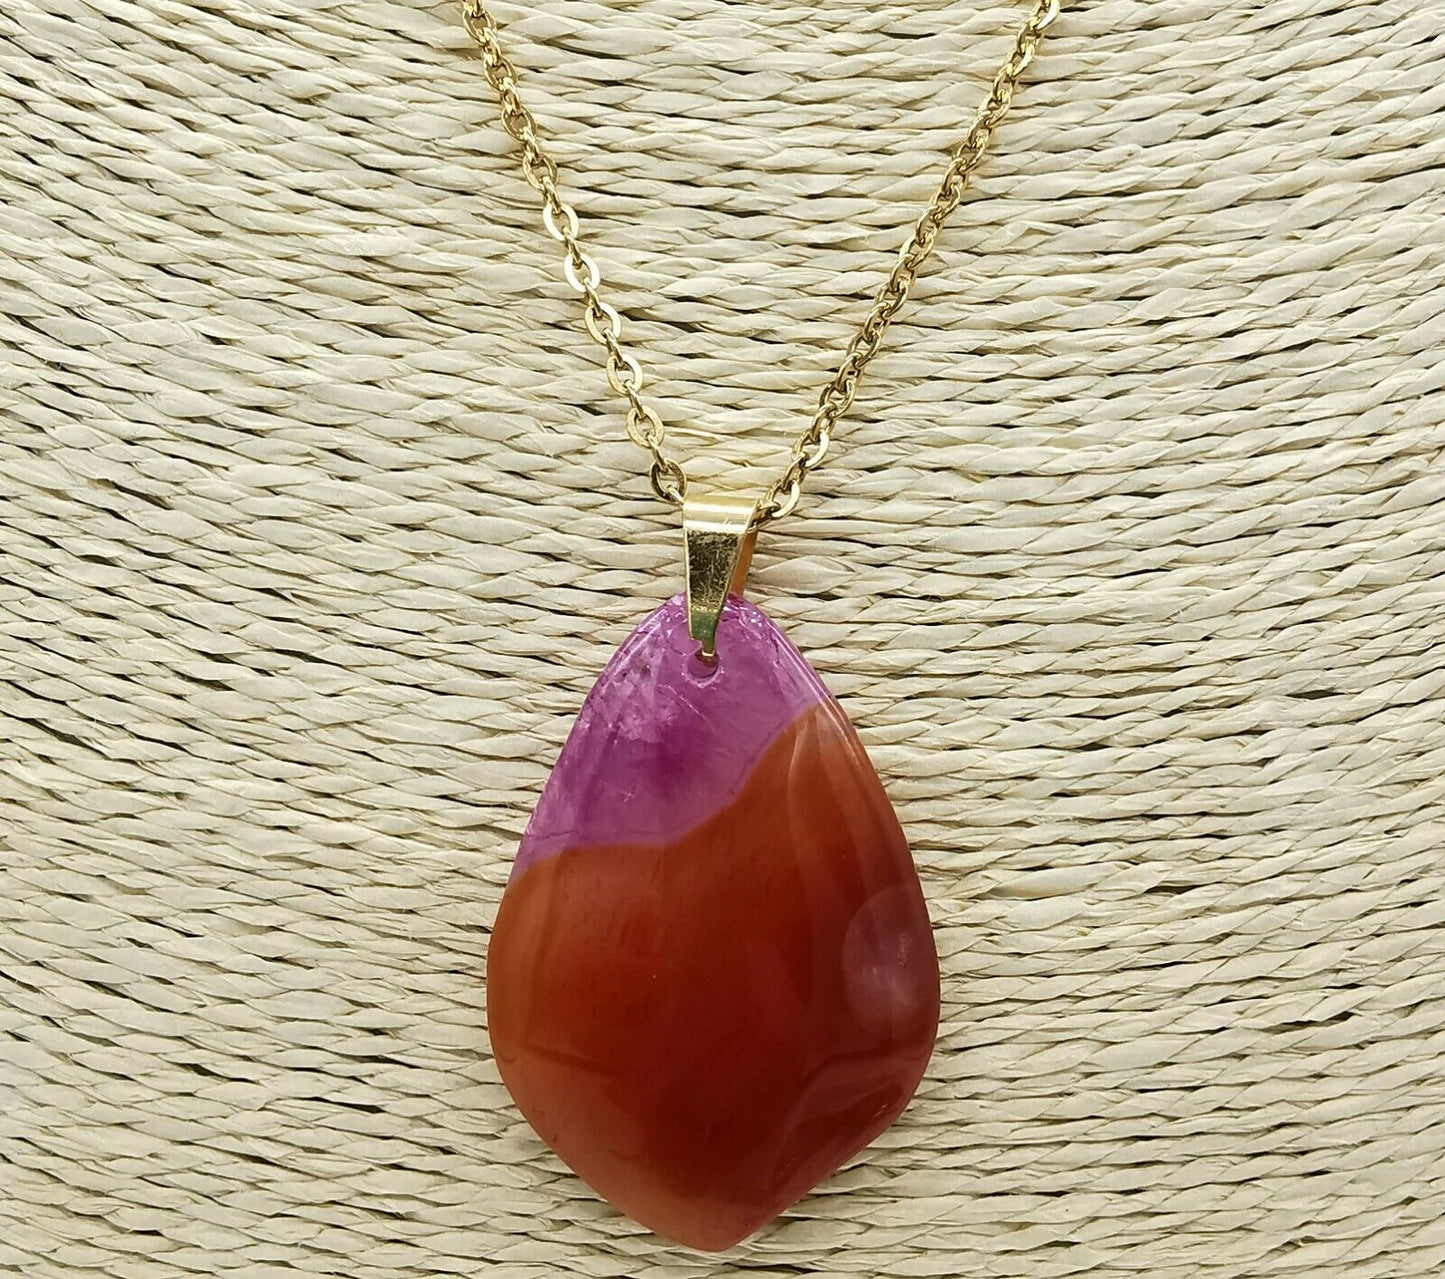 Natural Orange-Pink Agate Gemstone Pendant Stainless Steel Chain Necklace